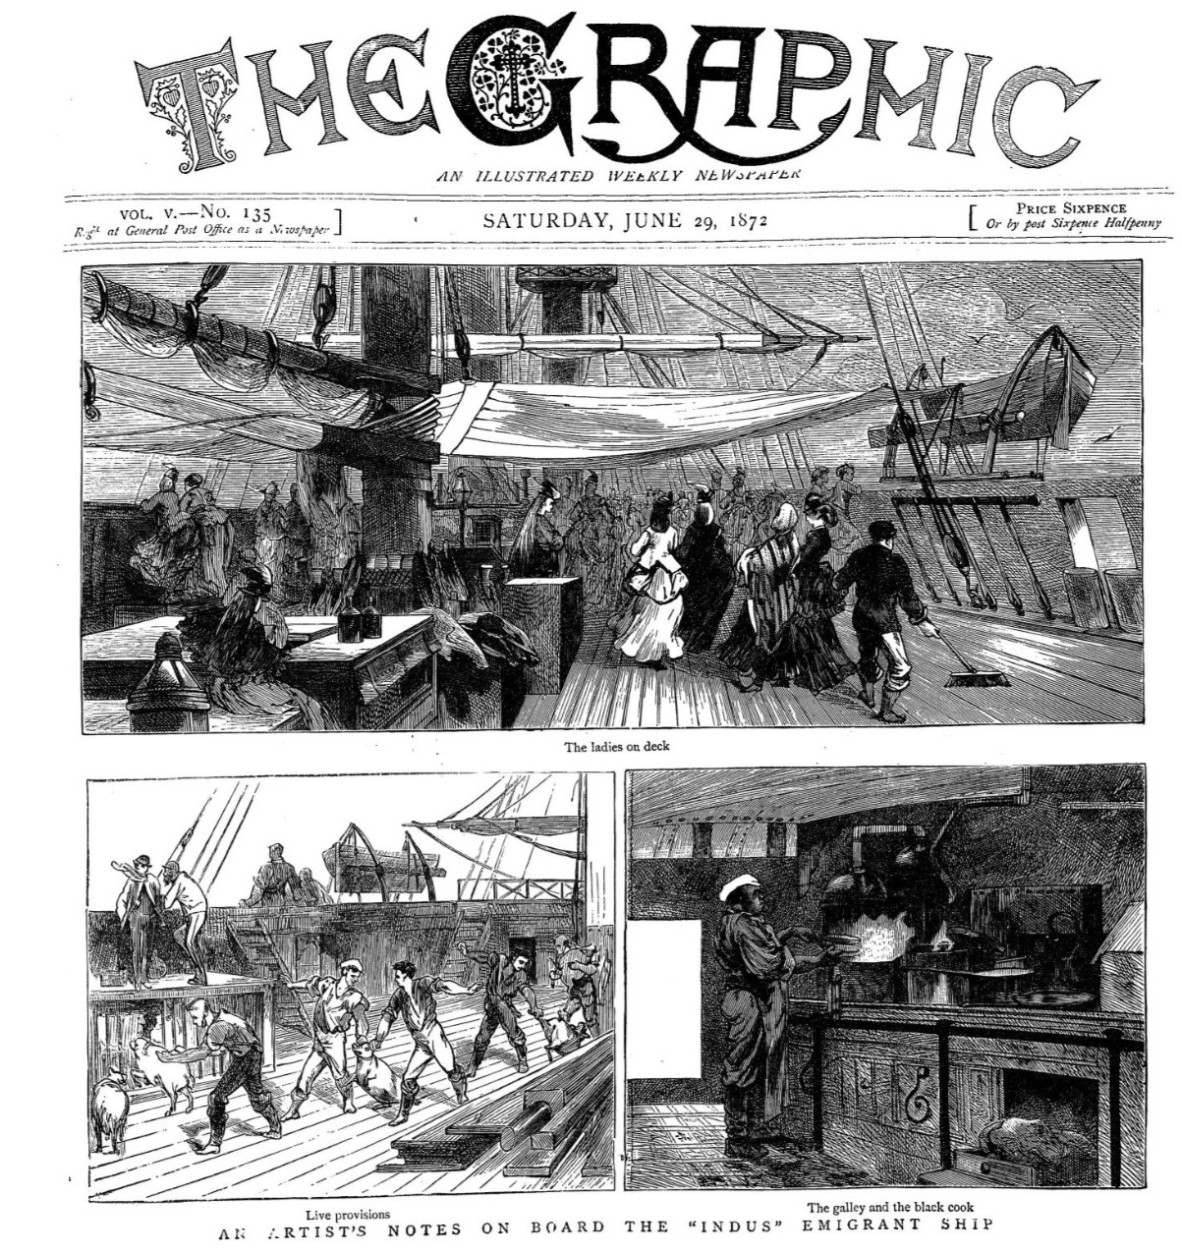 Sketches of the Indus emigrant ship taken from the front page of The Graphic 29 June 1872